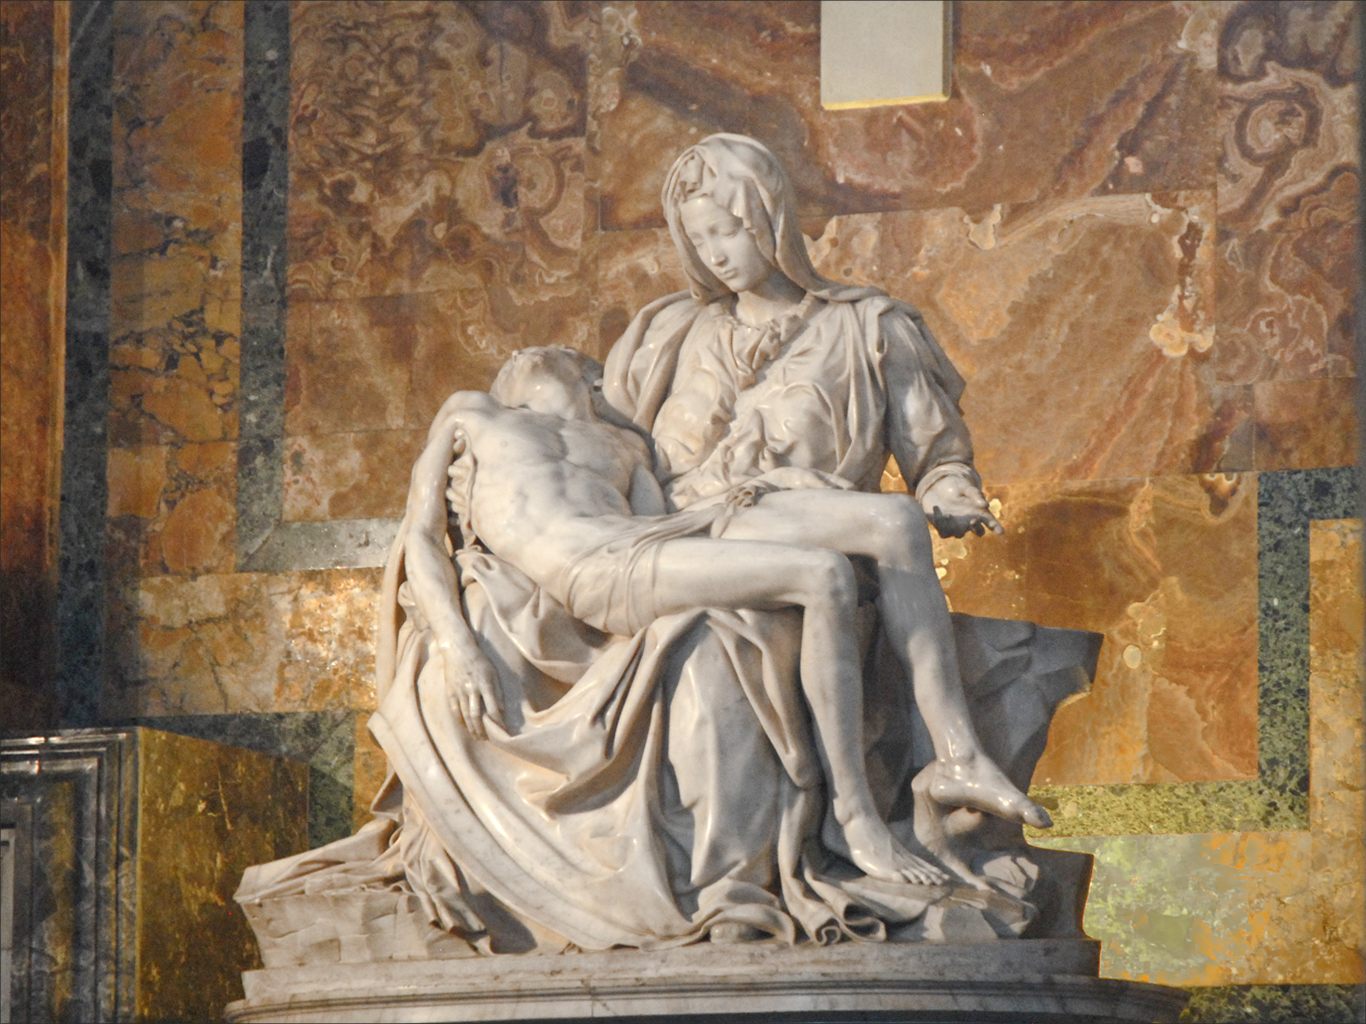 a large marble sculpture of a woman next to a man